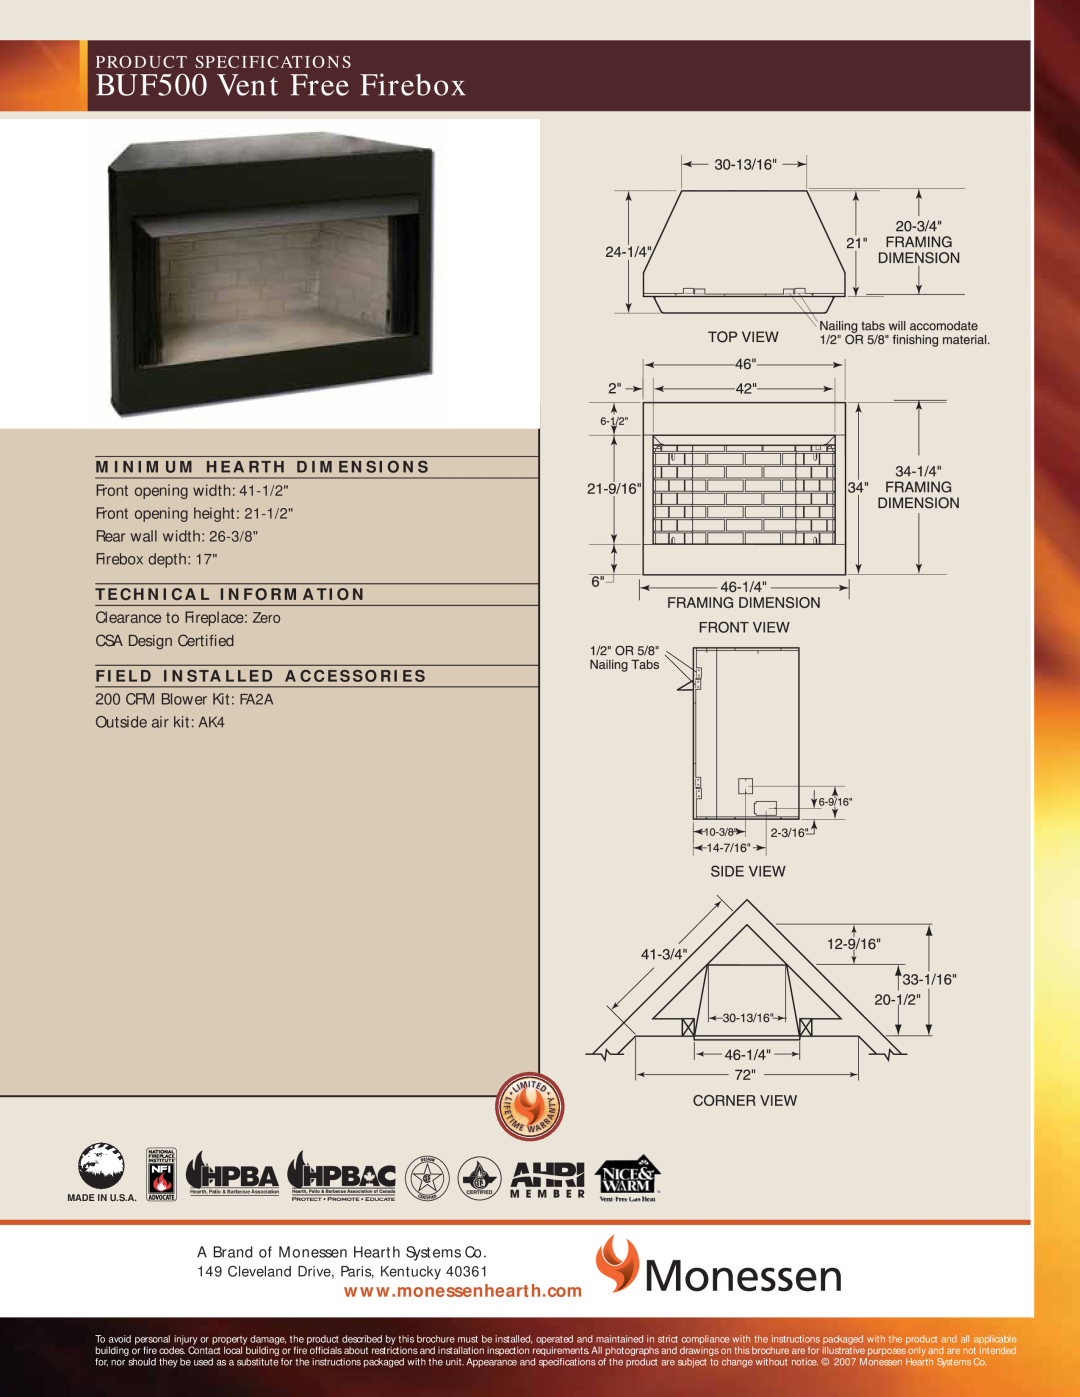 Monessen Hearth BUF400, BUF500 manual Unvented Vent, Free Fireboxes, Warnings, Installation And Operating, Instructions 